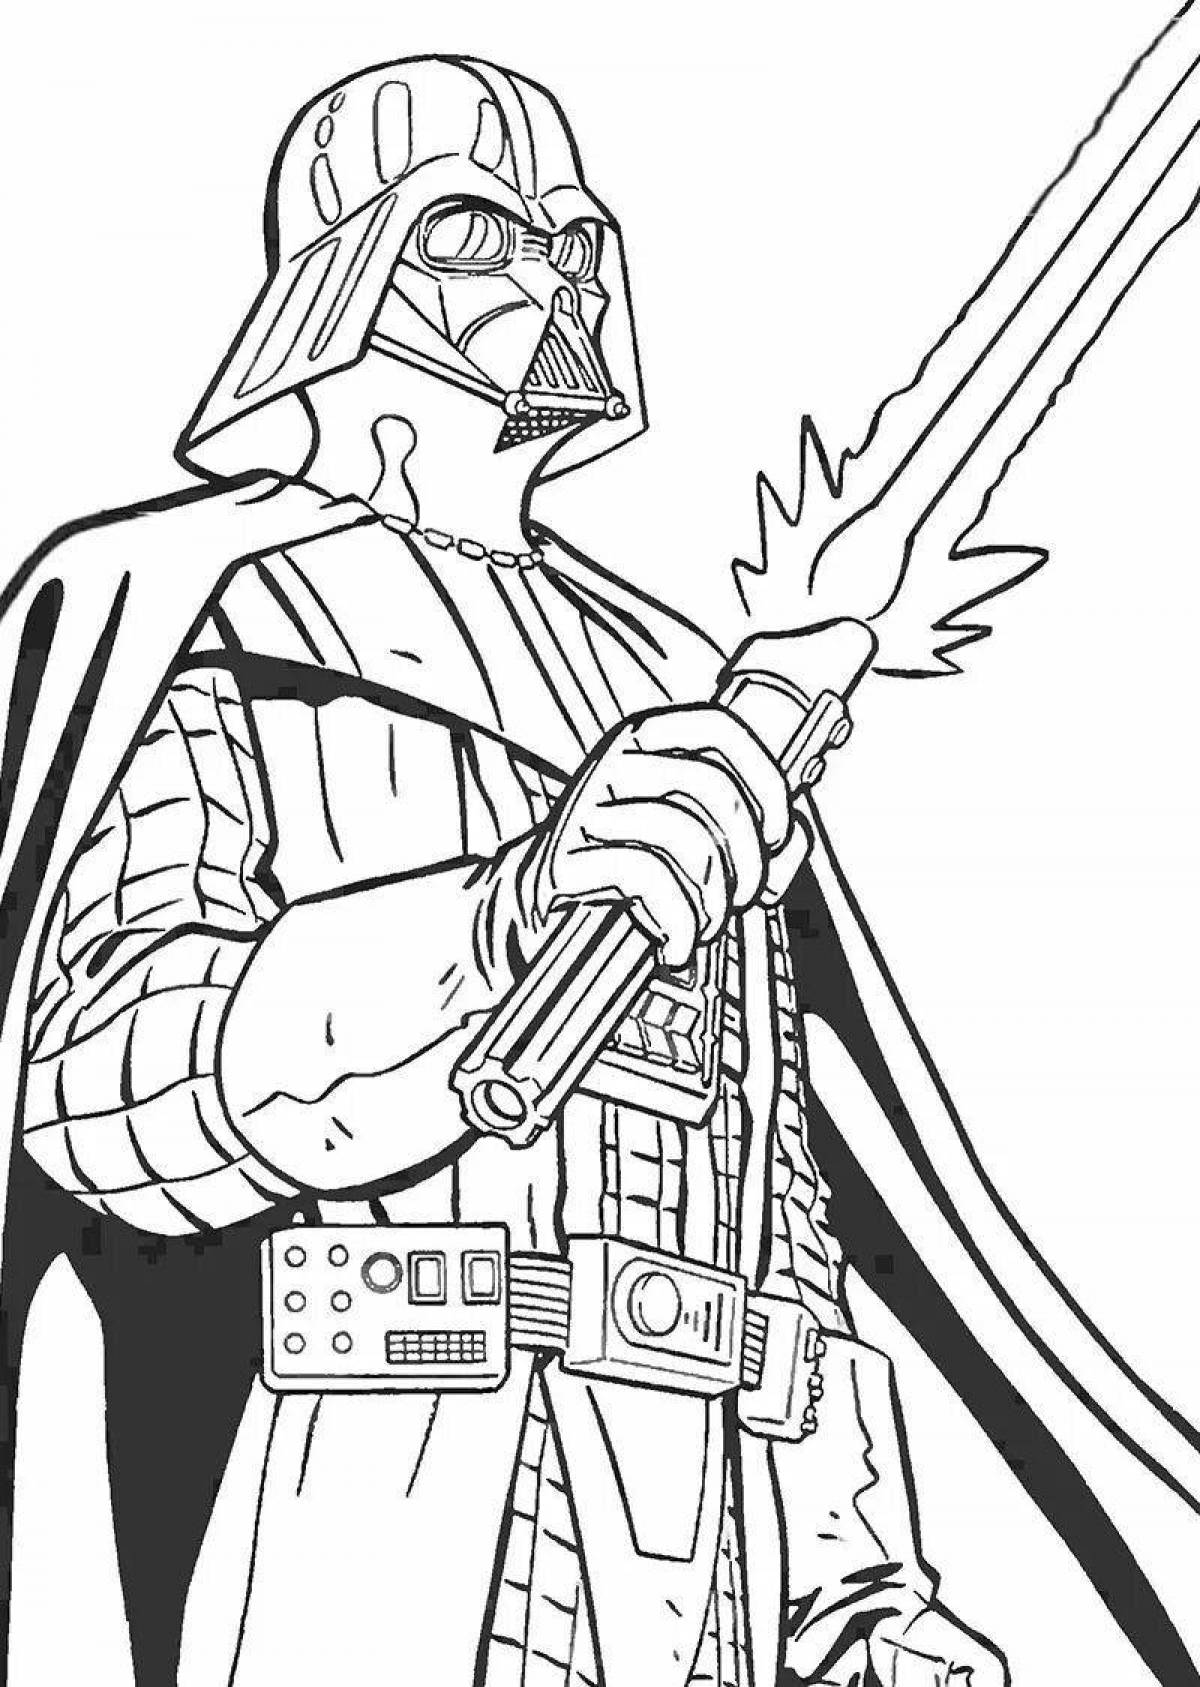 Star Wars coloring book for boys